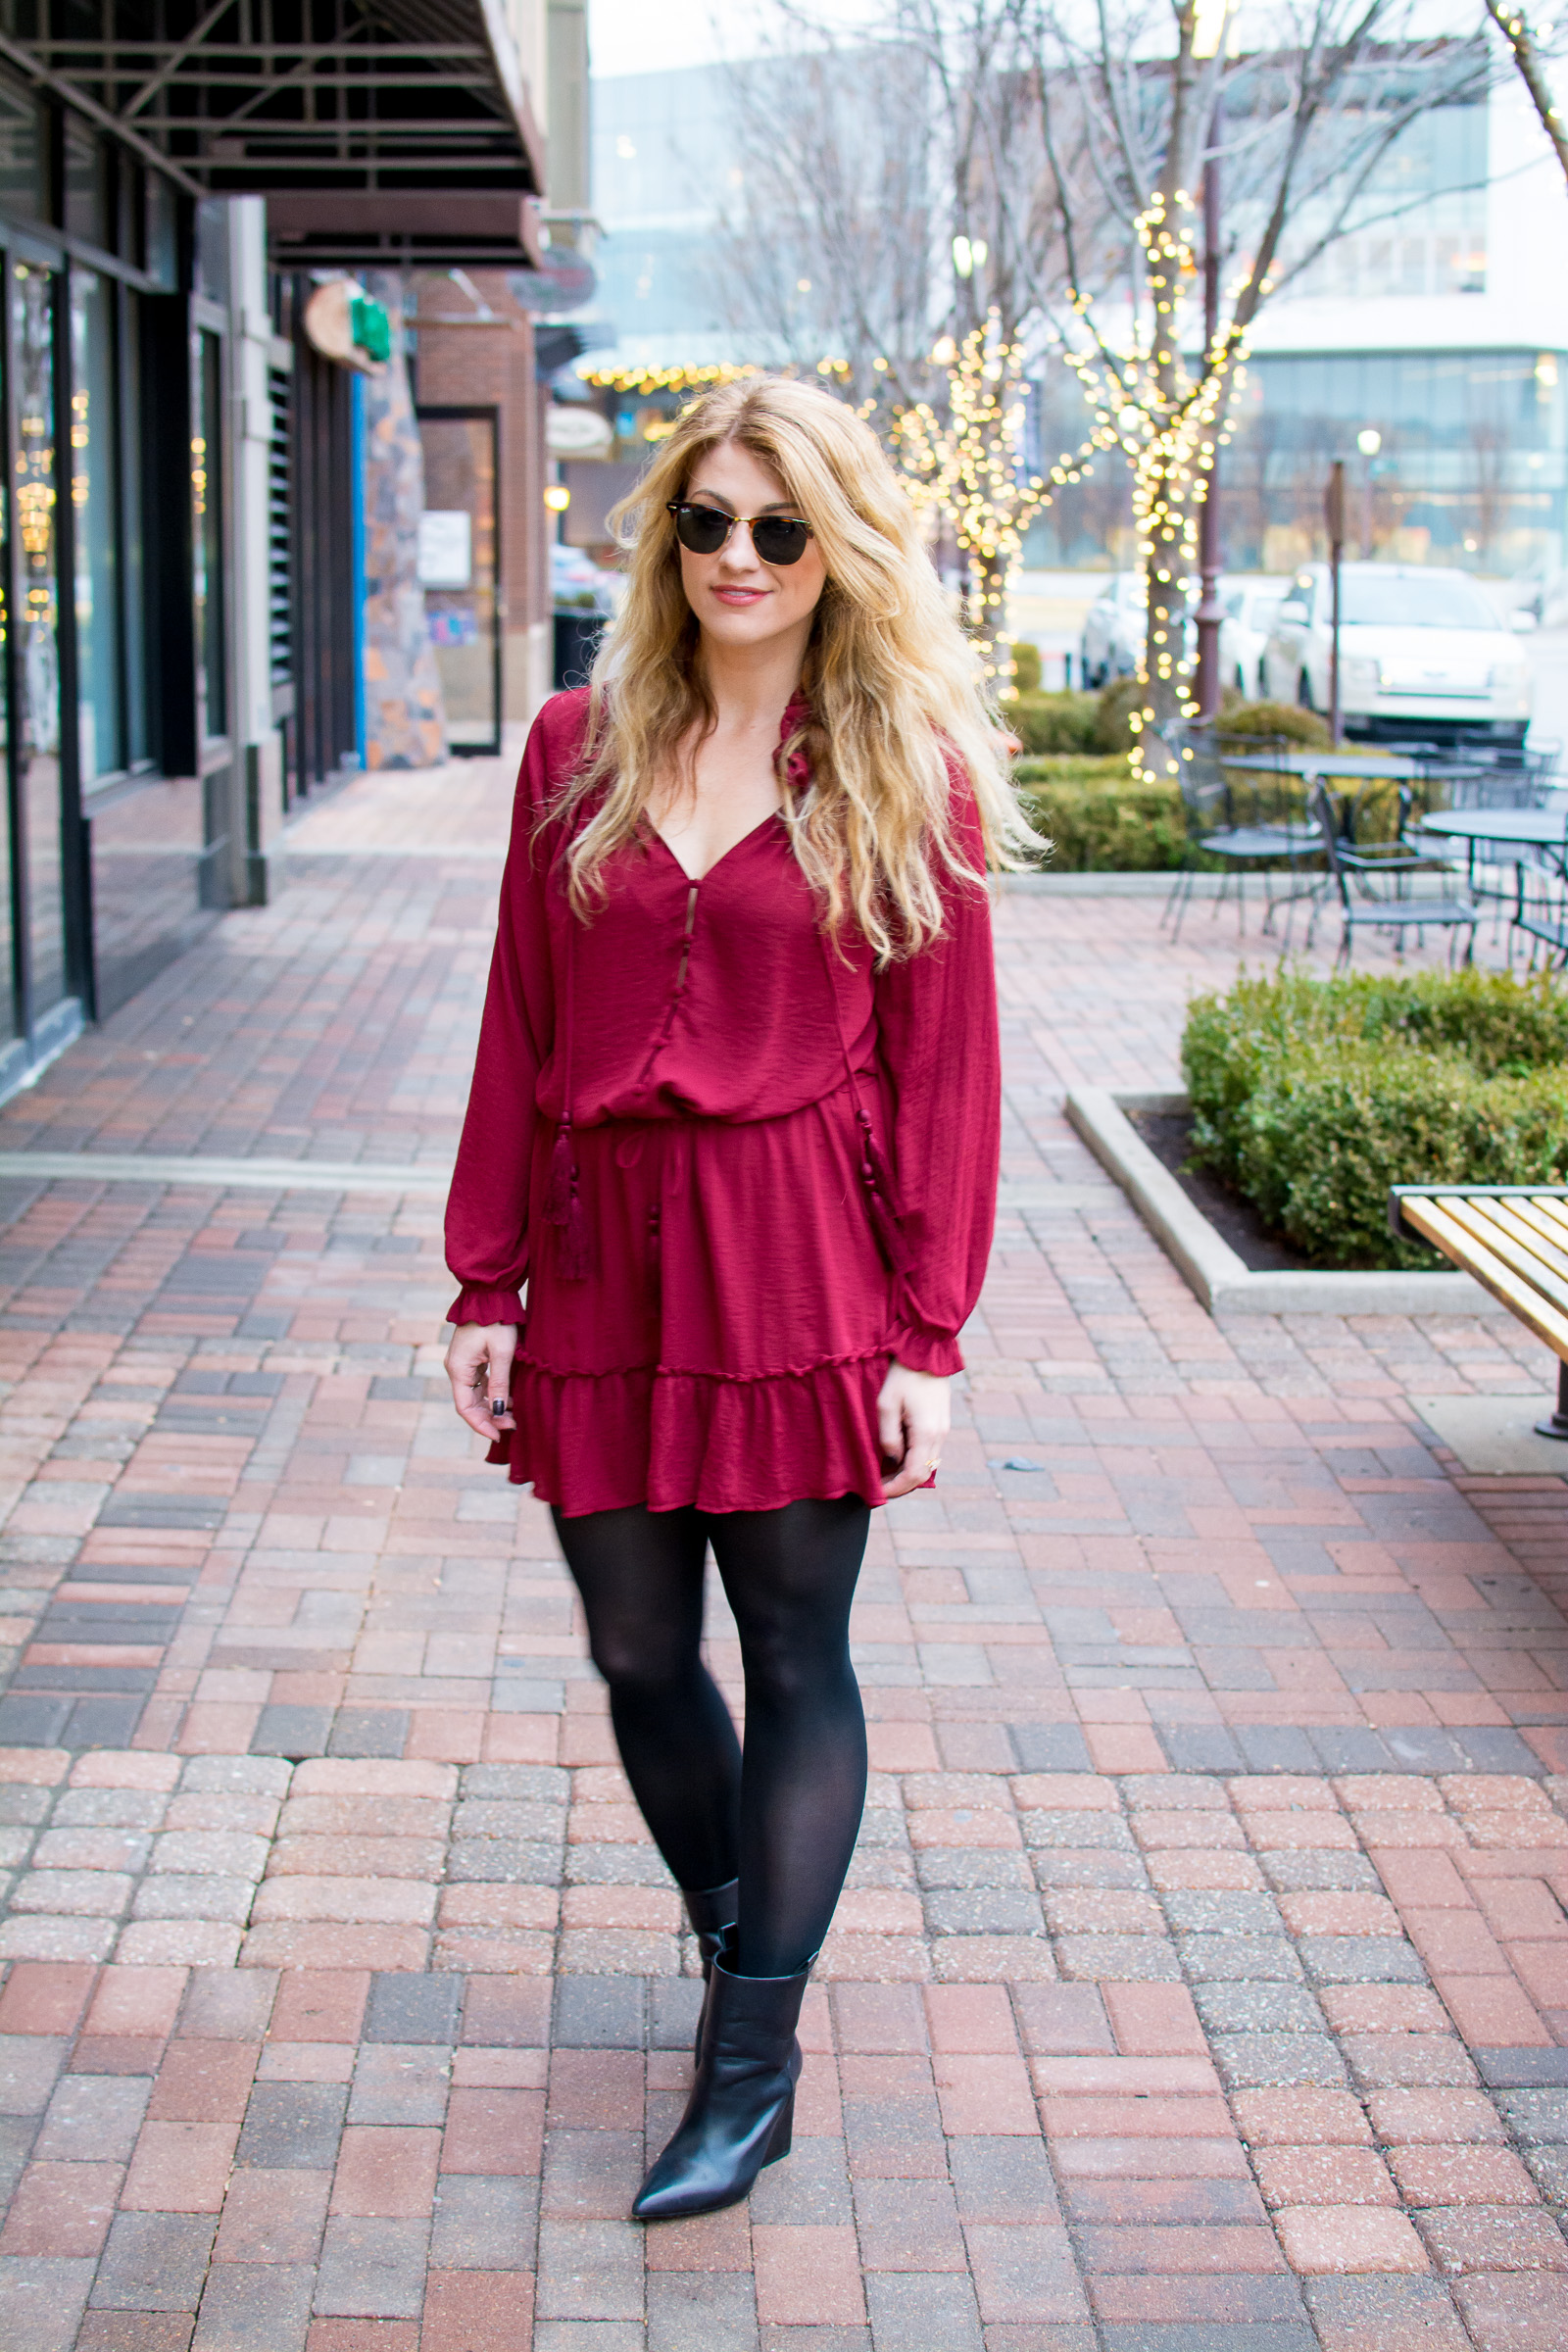 Valentine's Day Outfit Idea: Red Dress + Black Boots. | LSR